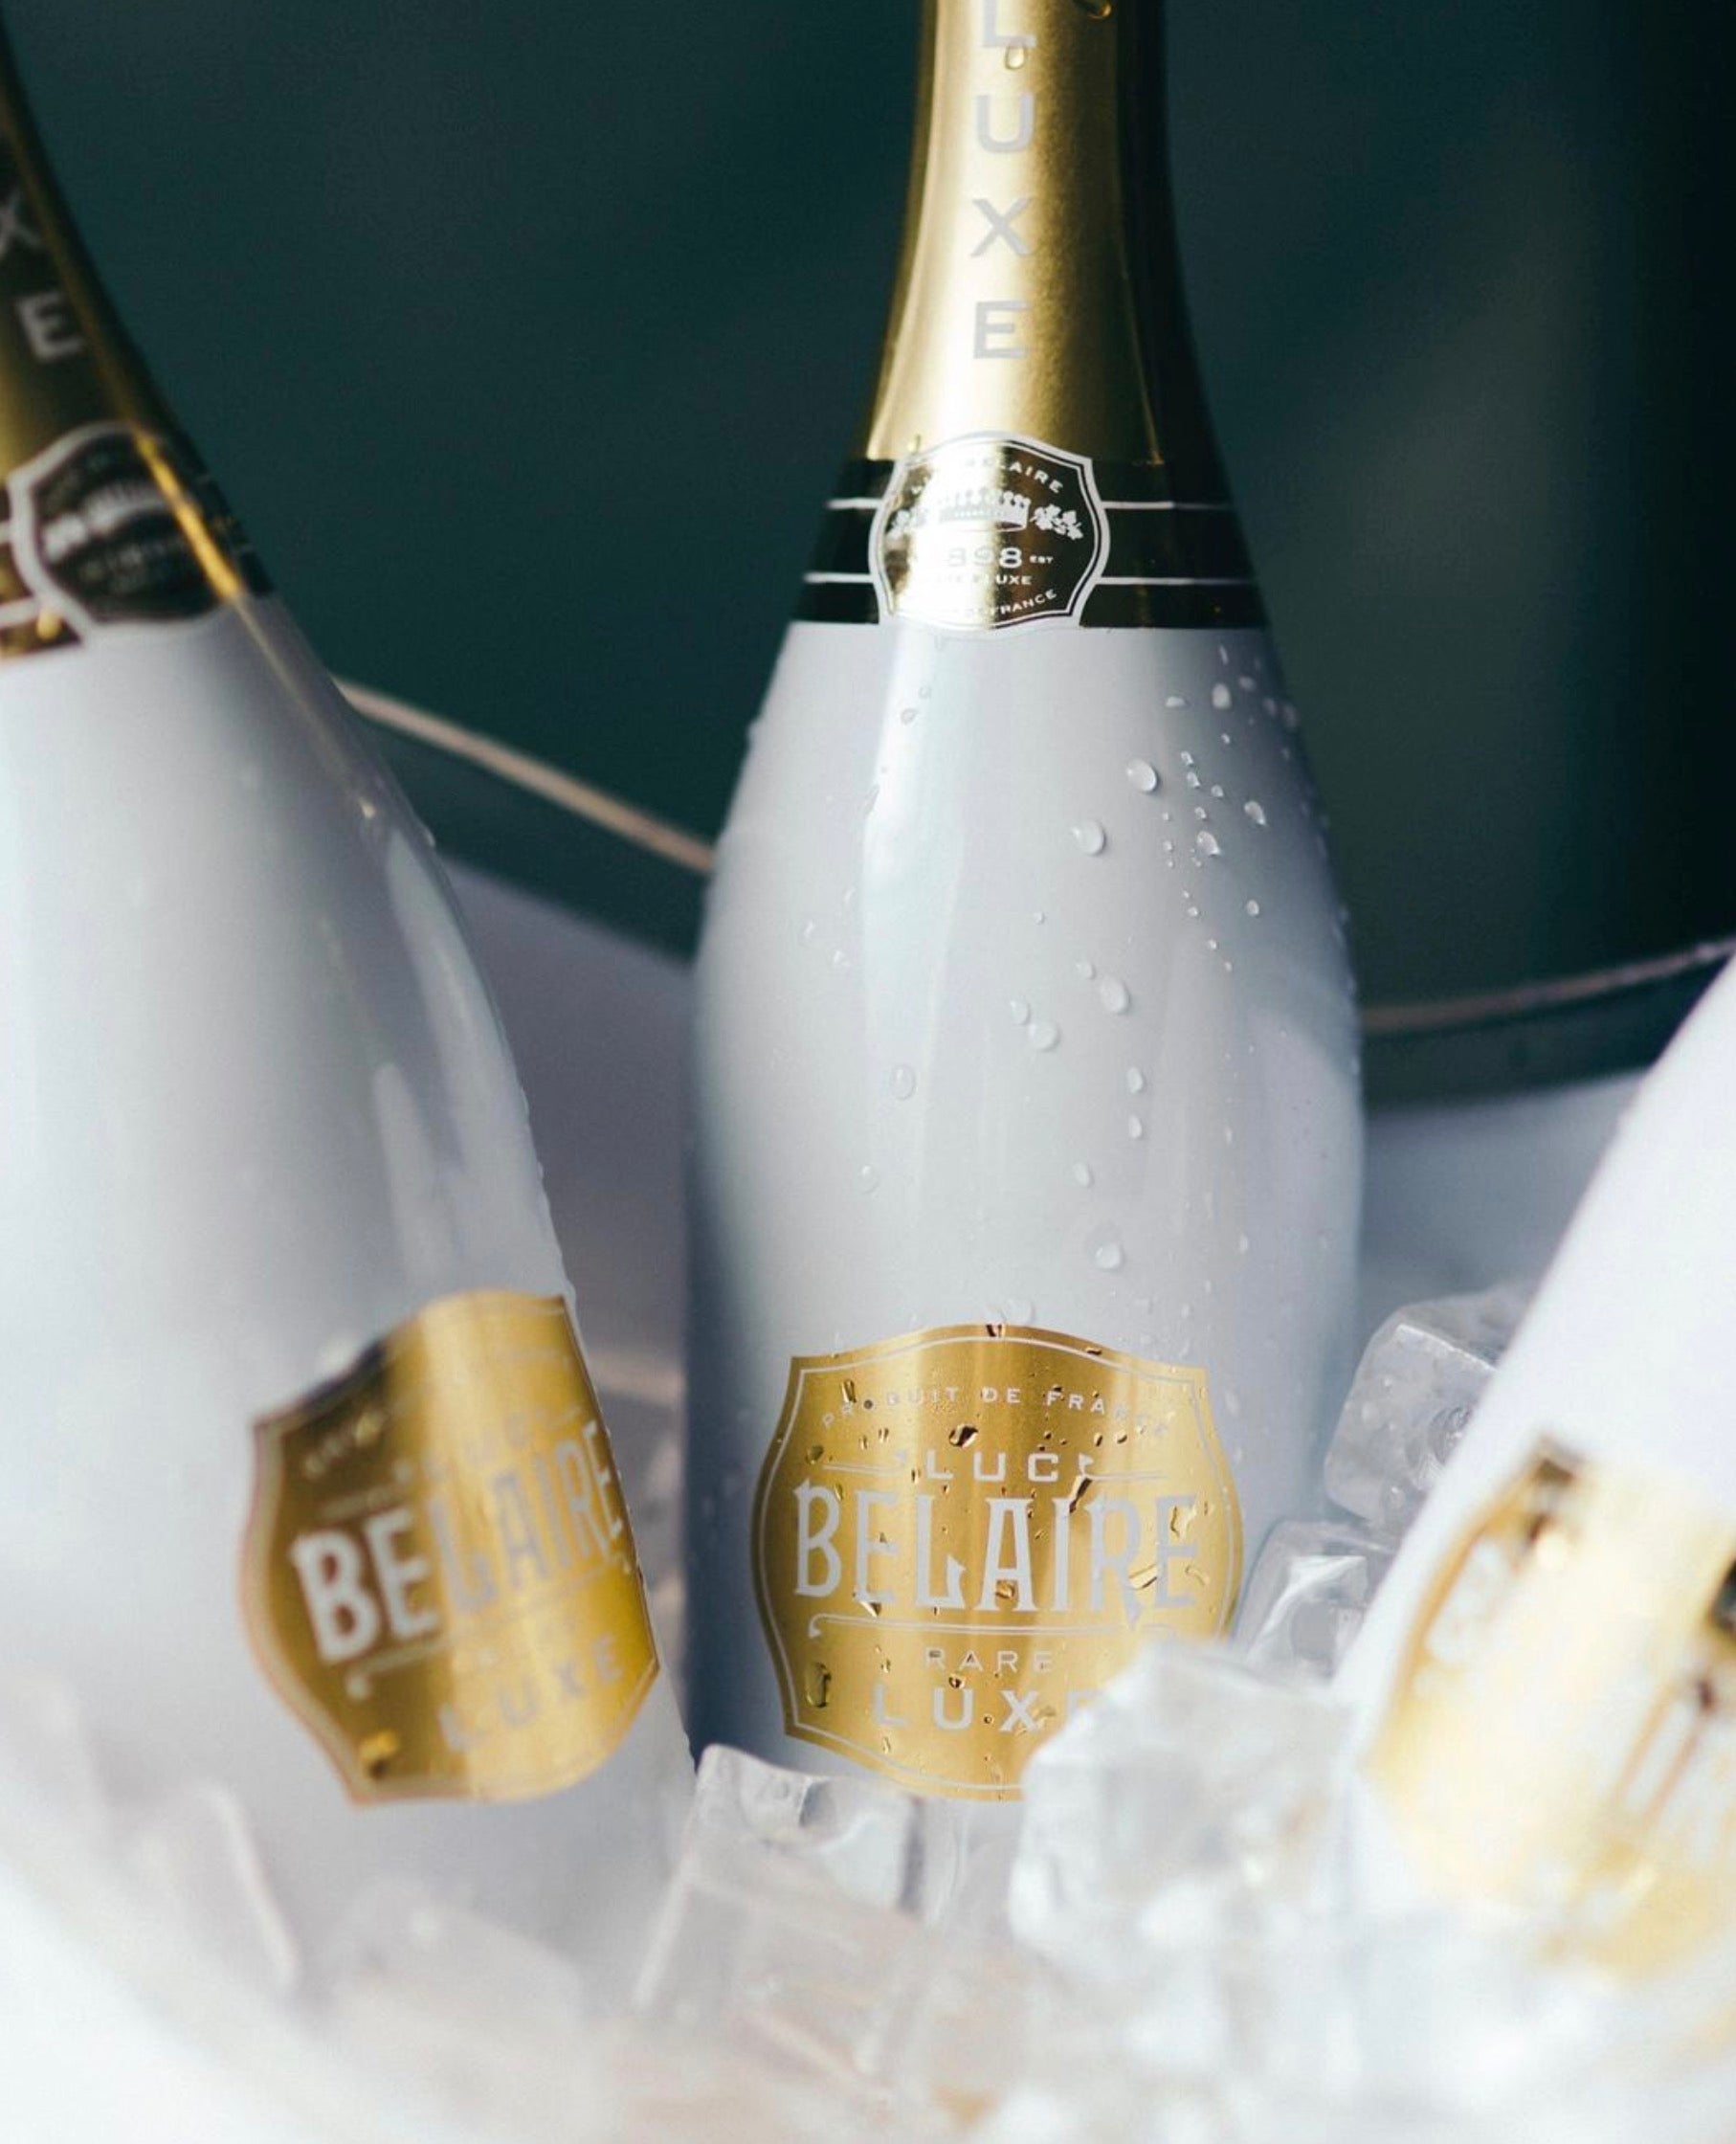 Luc Belaire Champagne Style Label